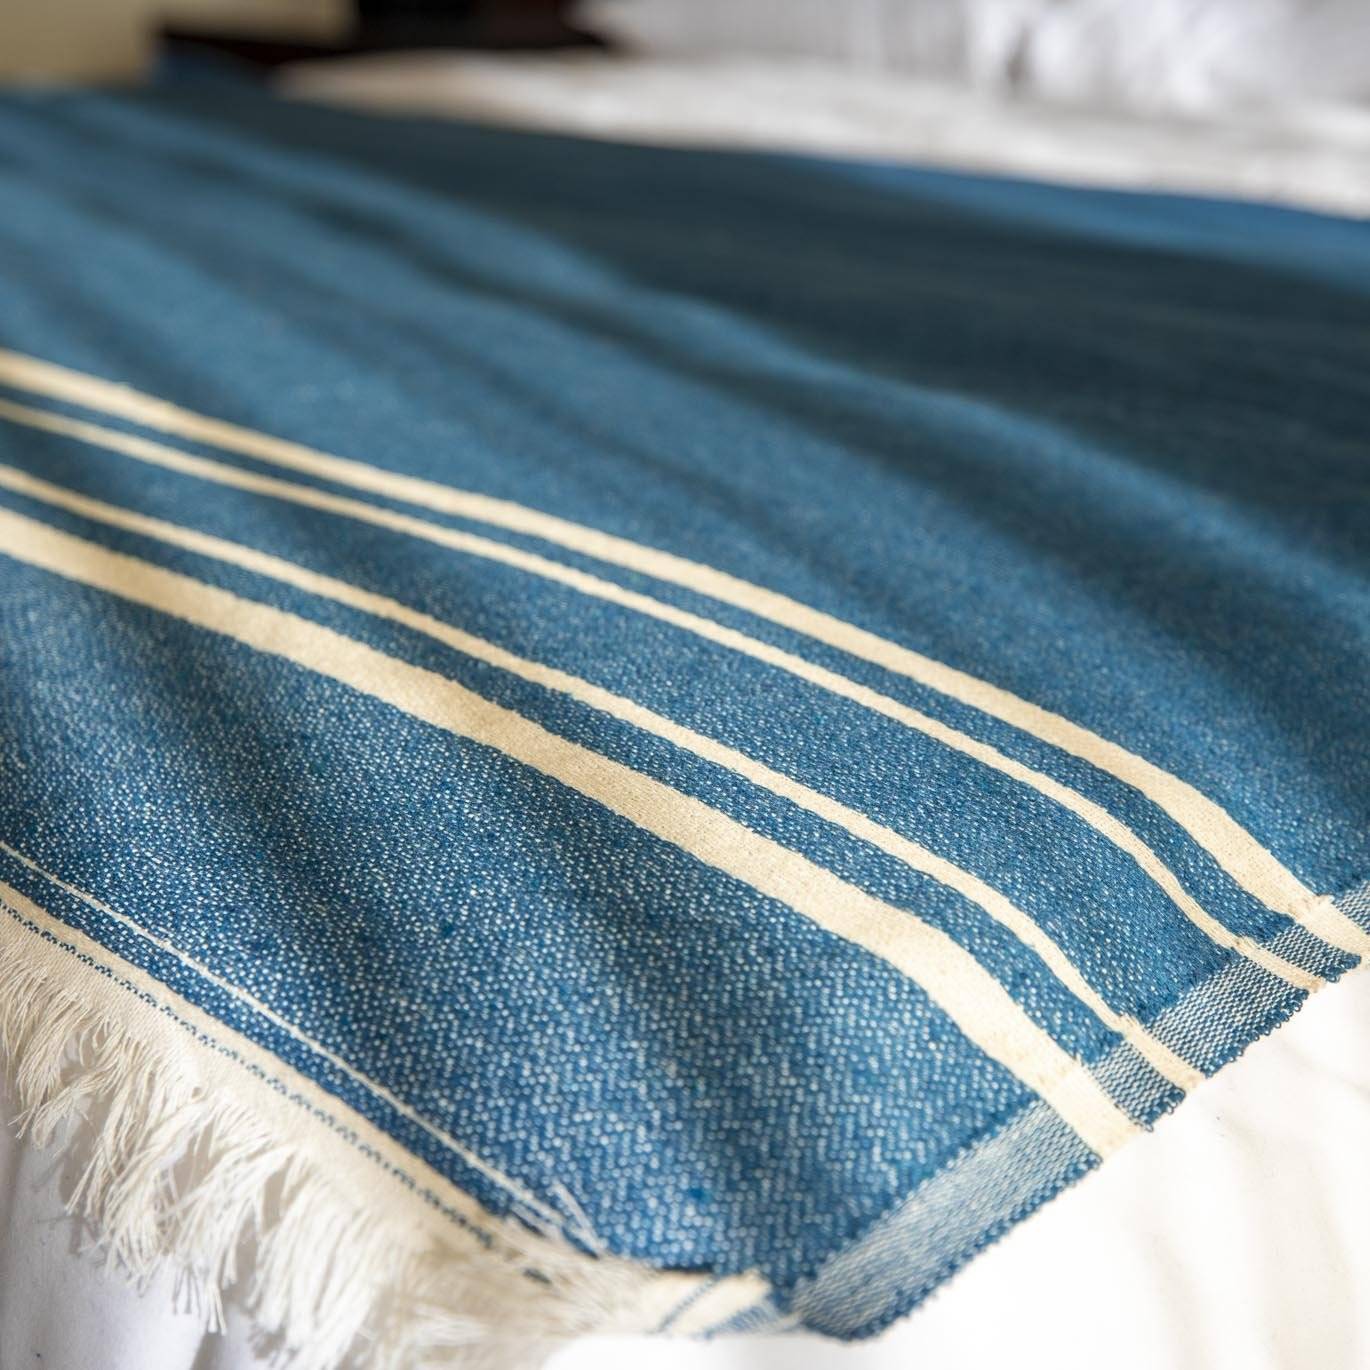 Bedspread in Teal - Near East Imports